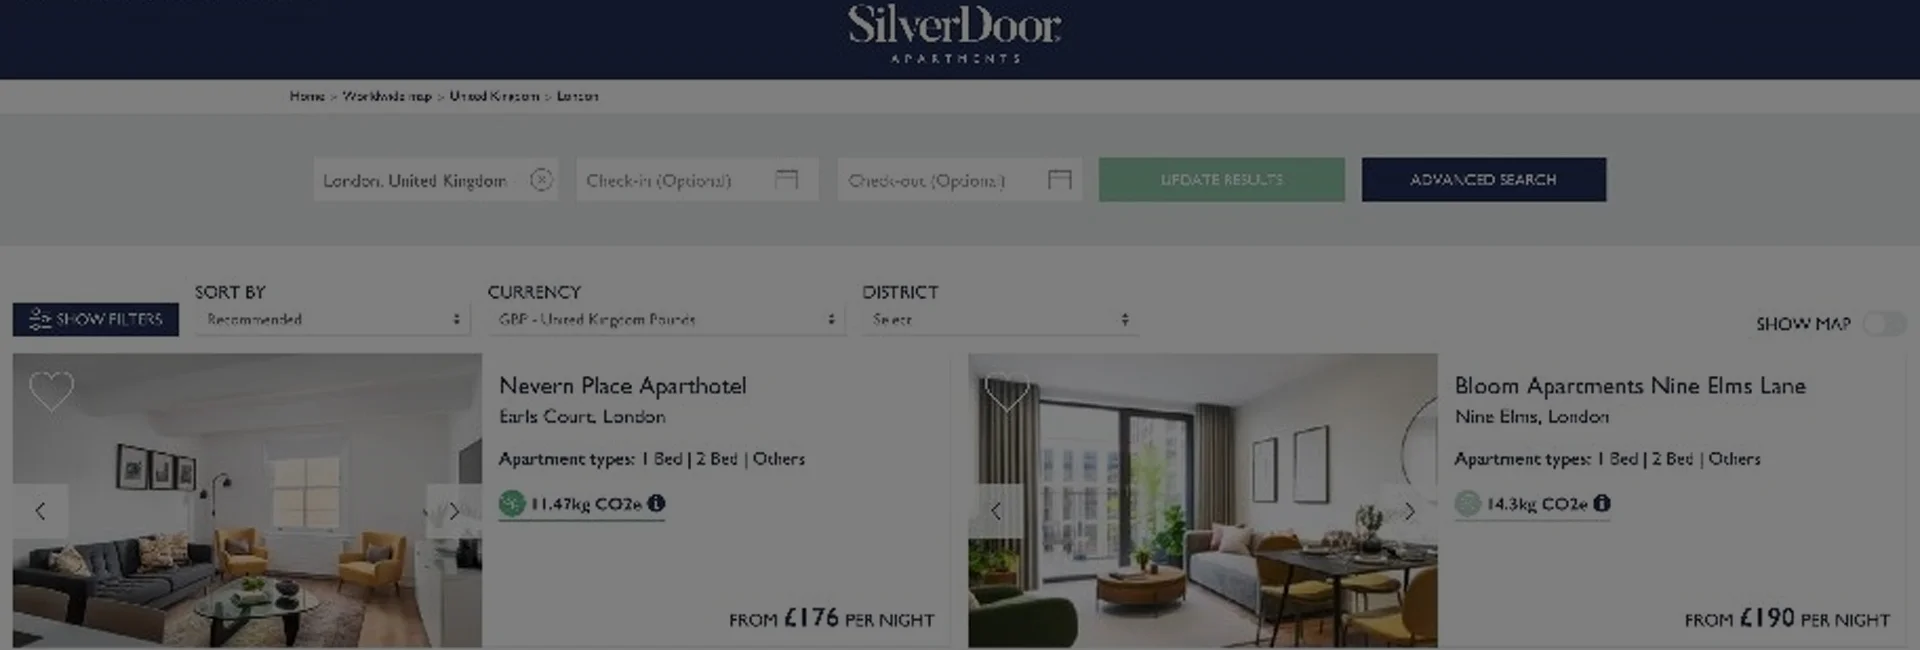 SilverDoor launches new Carbon Calculator for the Corporate Housing sector - ISS Relocations